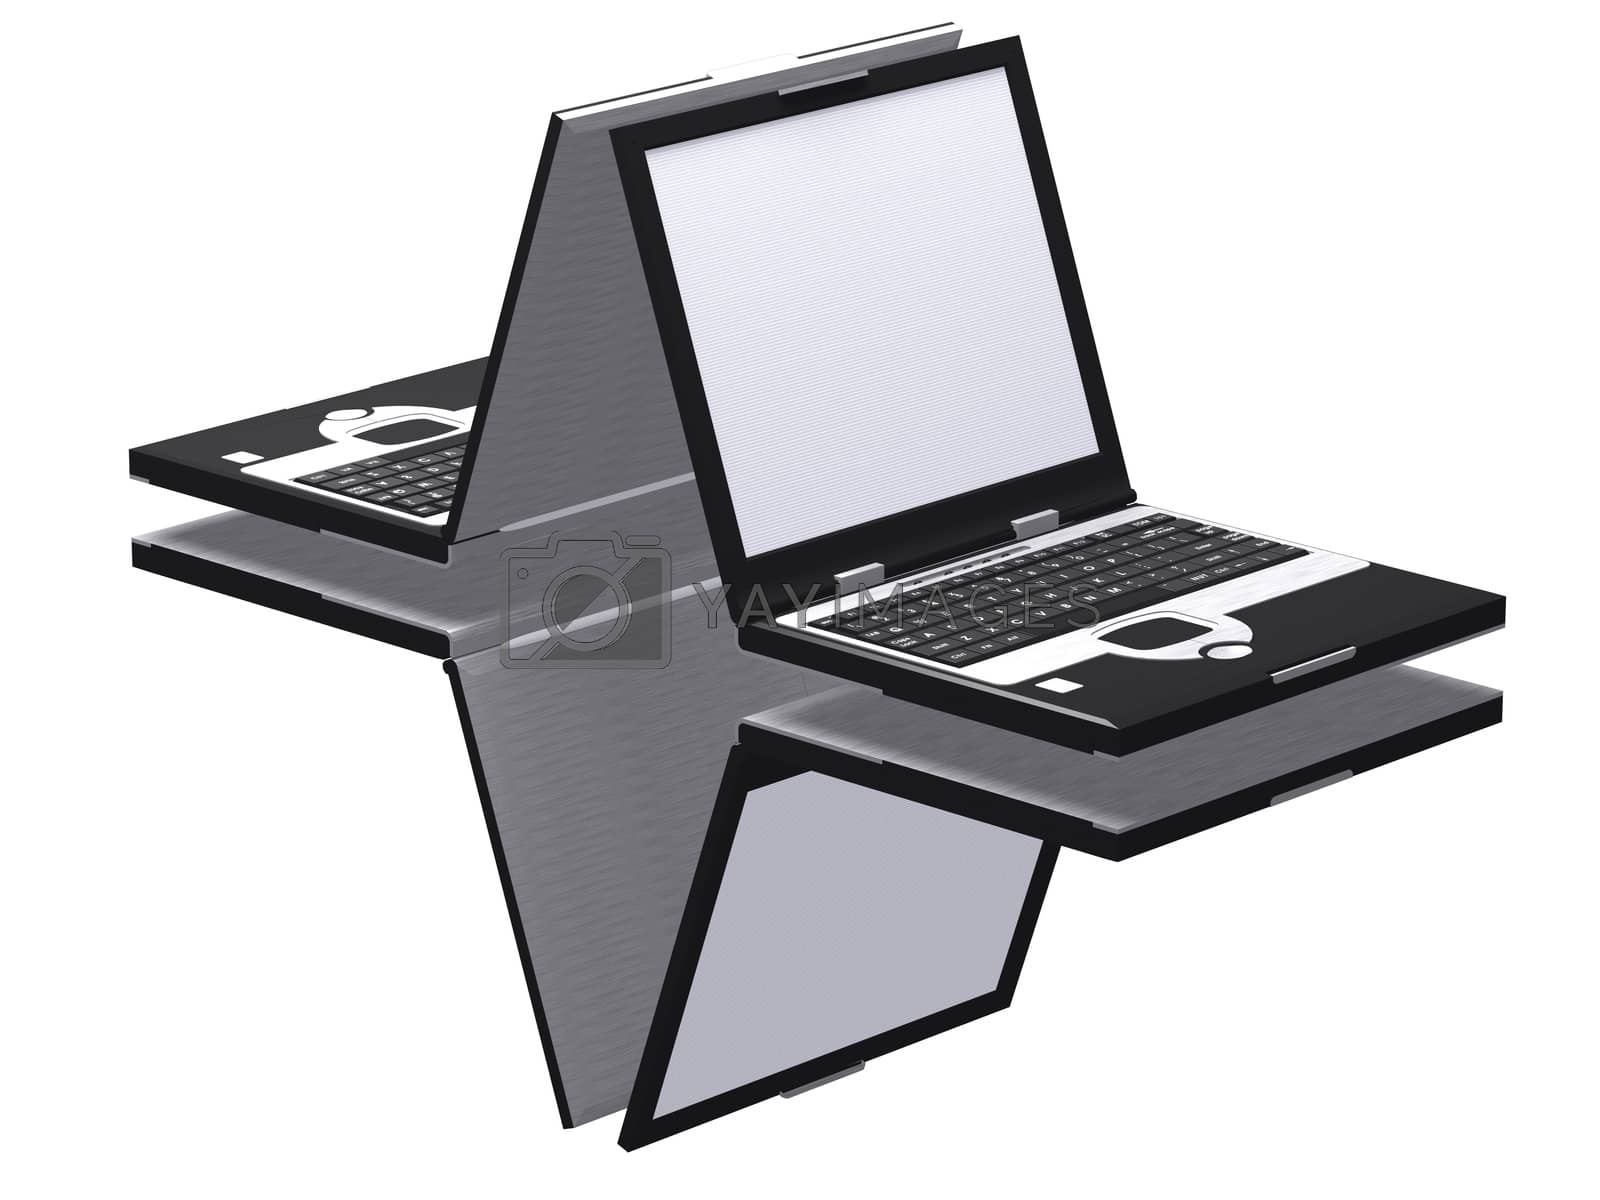 Royalty free image of blank laptops by galcka